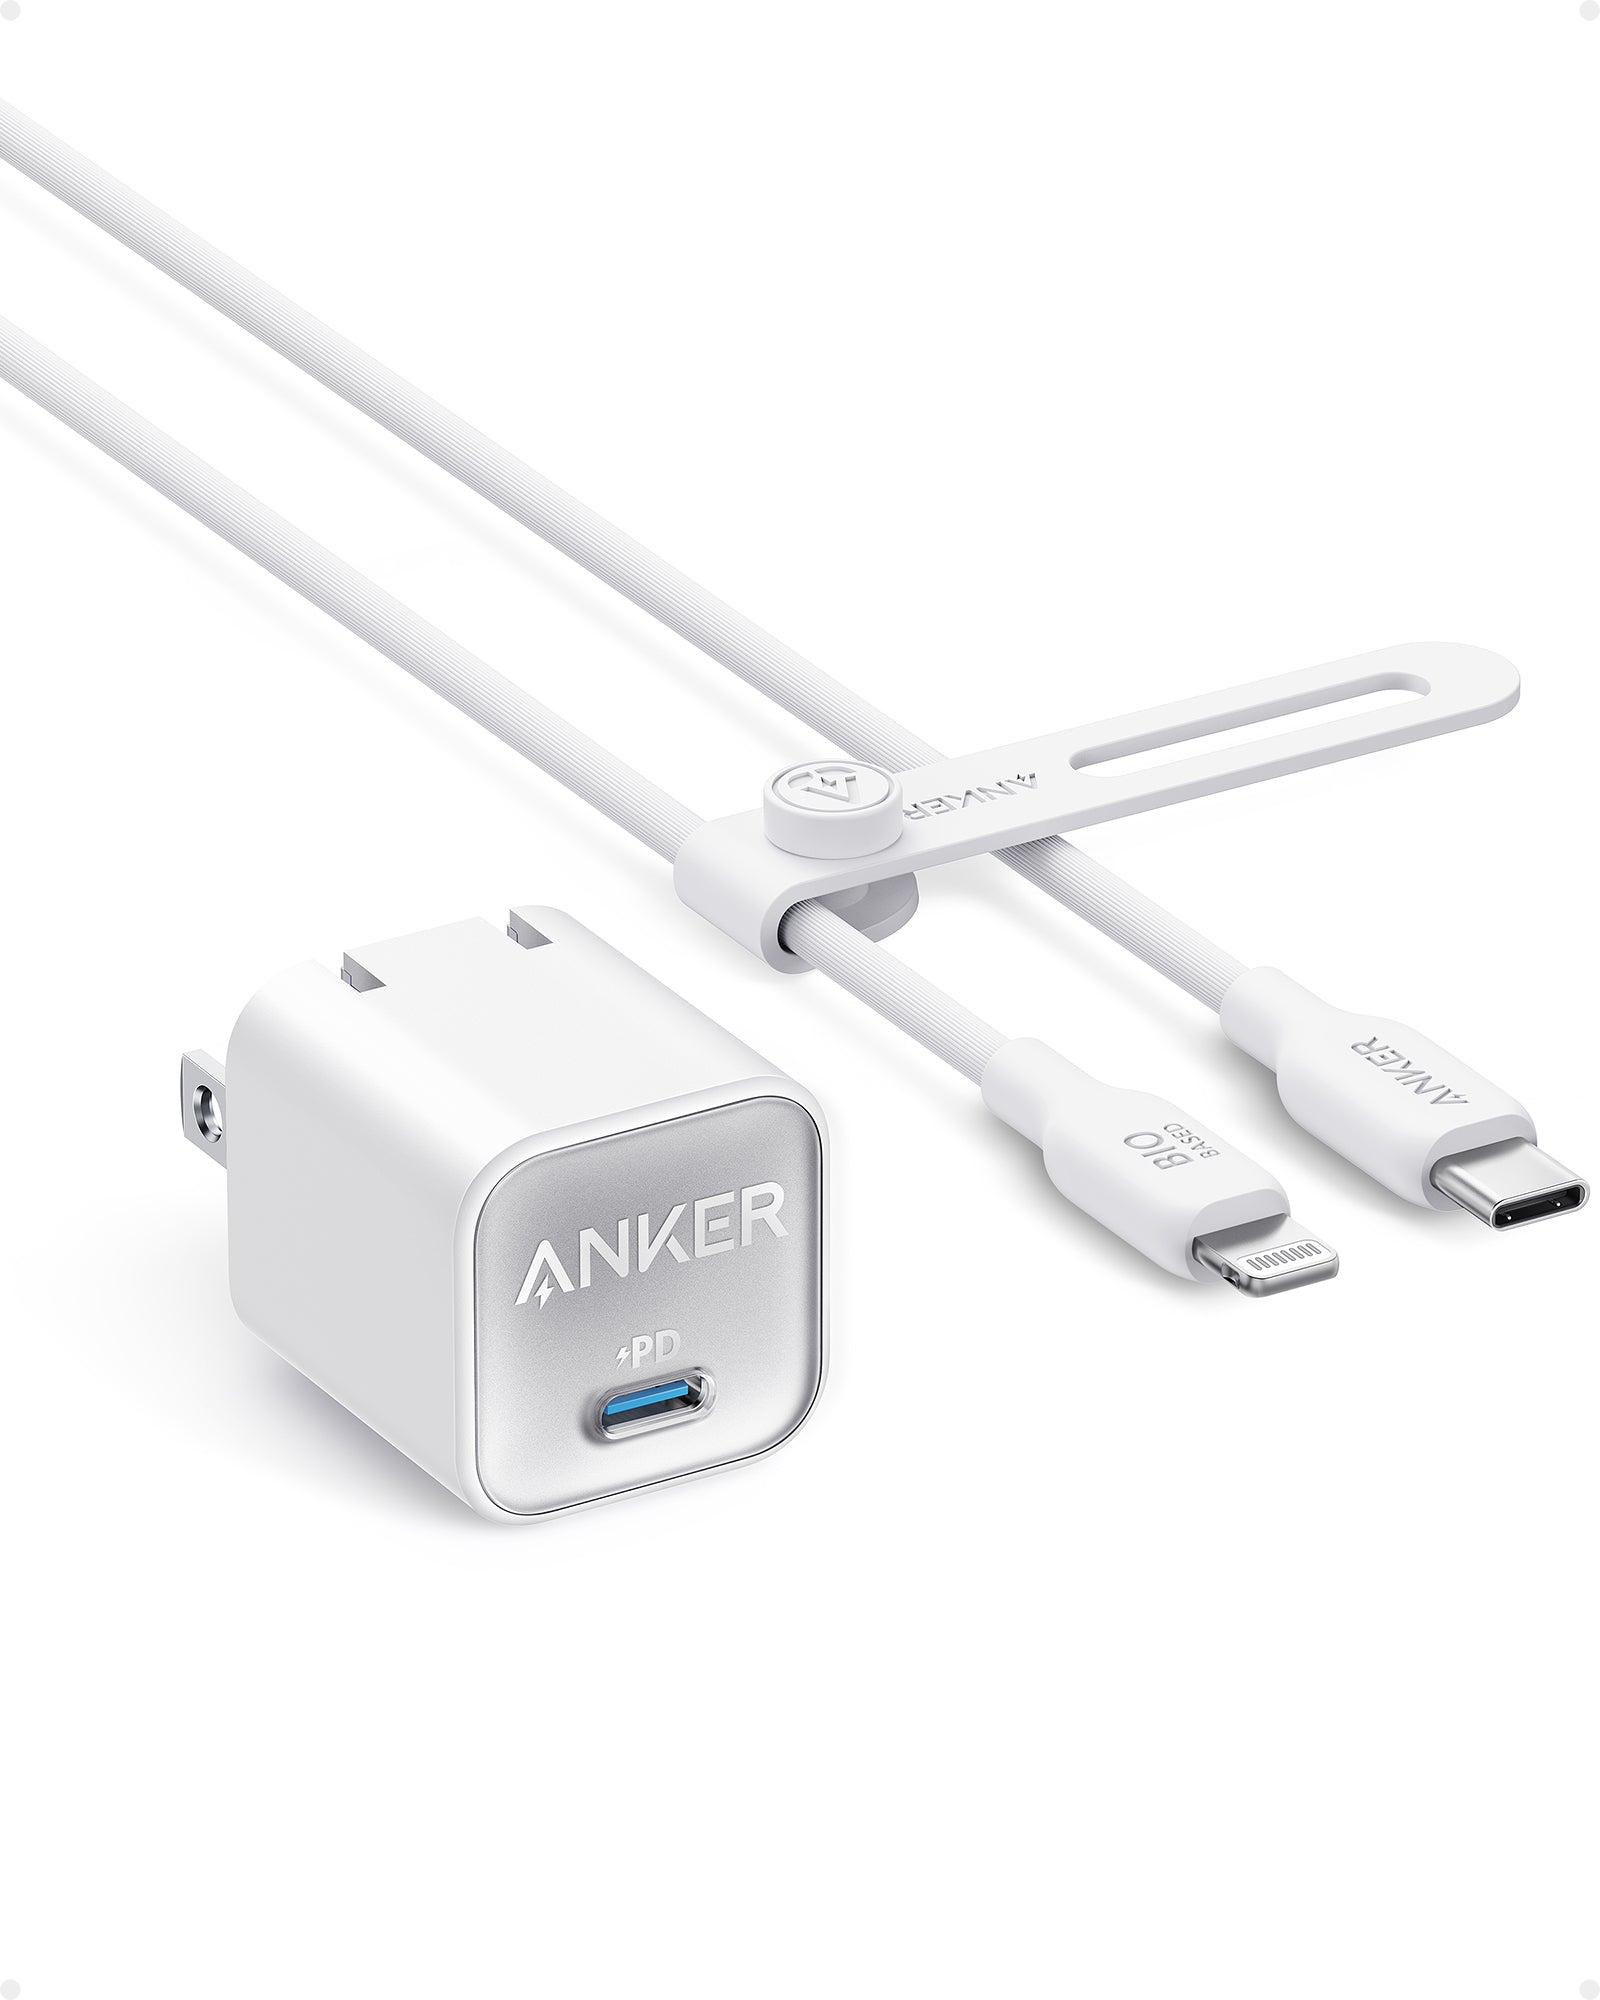 Anker 511 Charger (Nano 3, 30W) with Lightning Cable (6ft) - Anker US